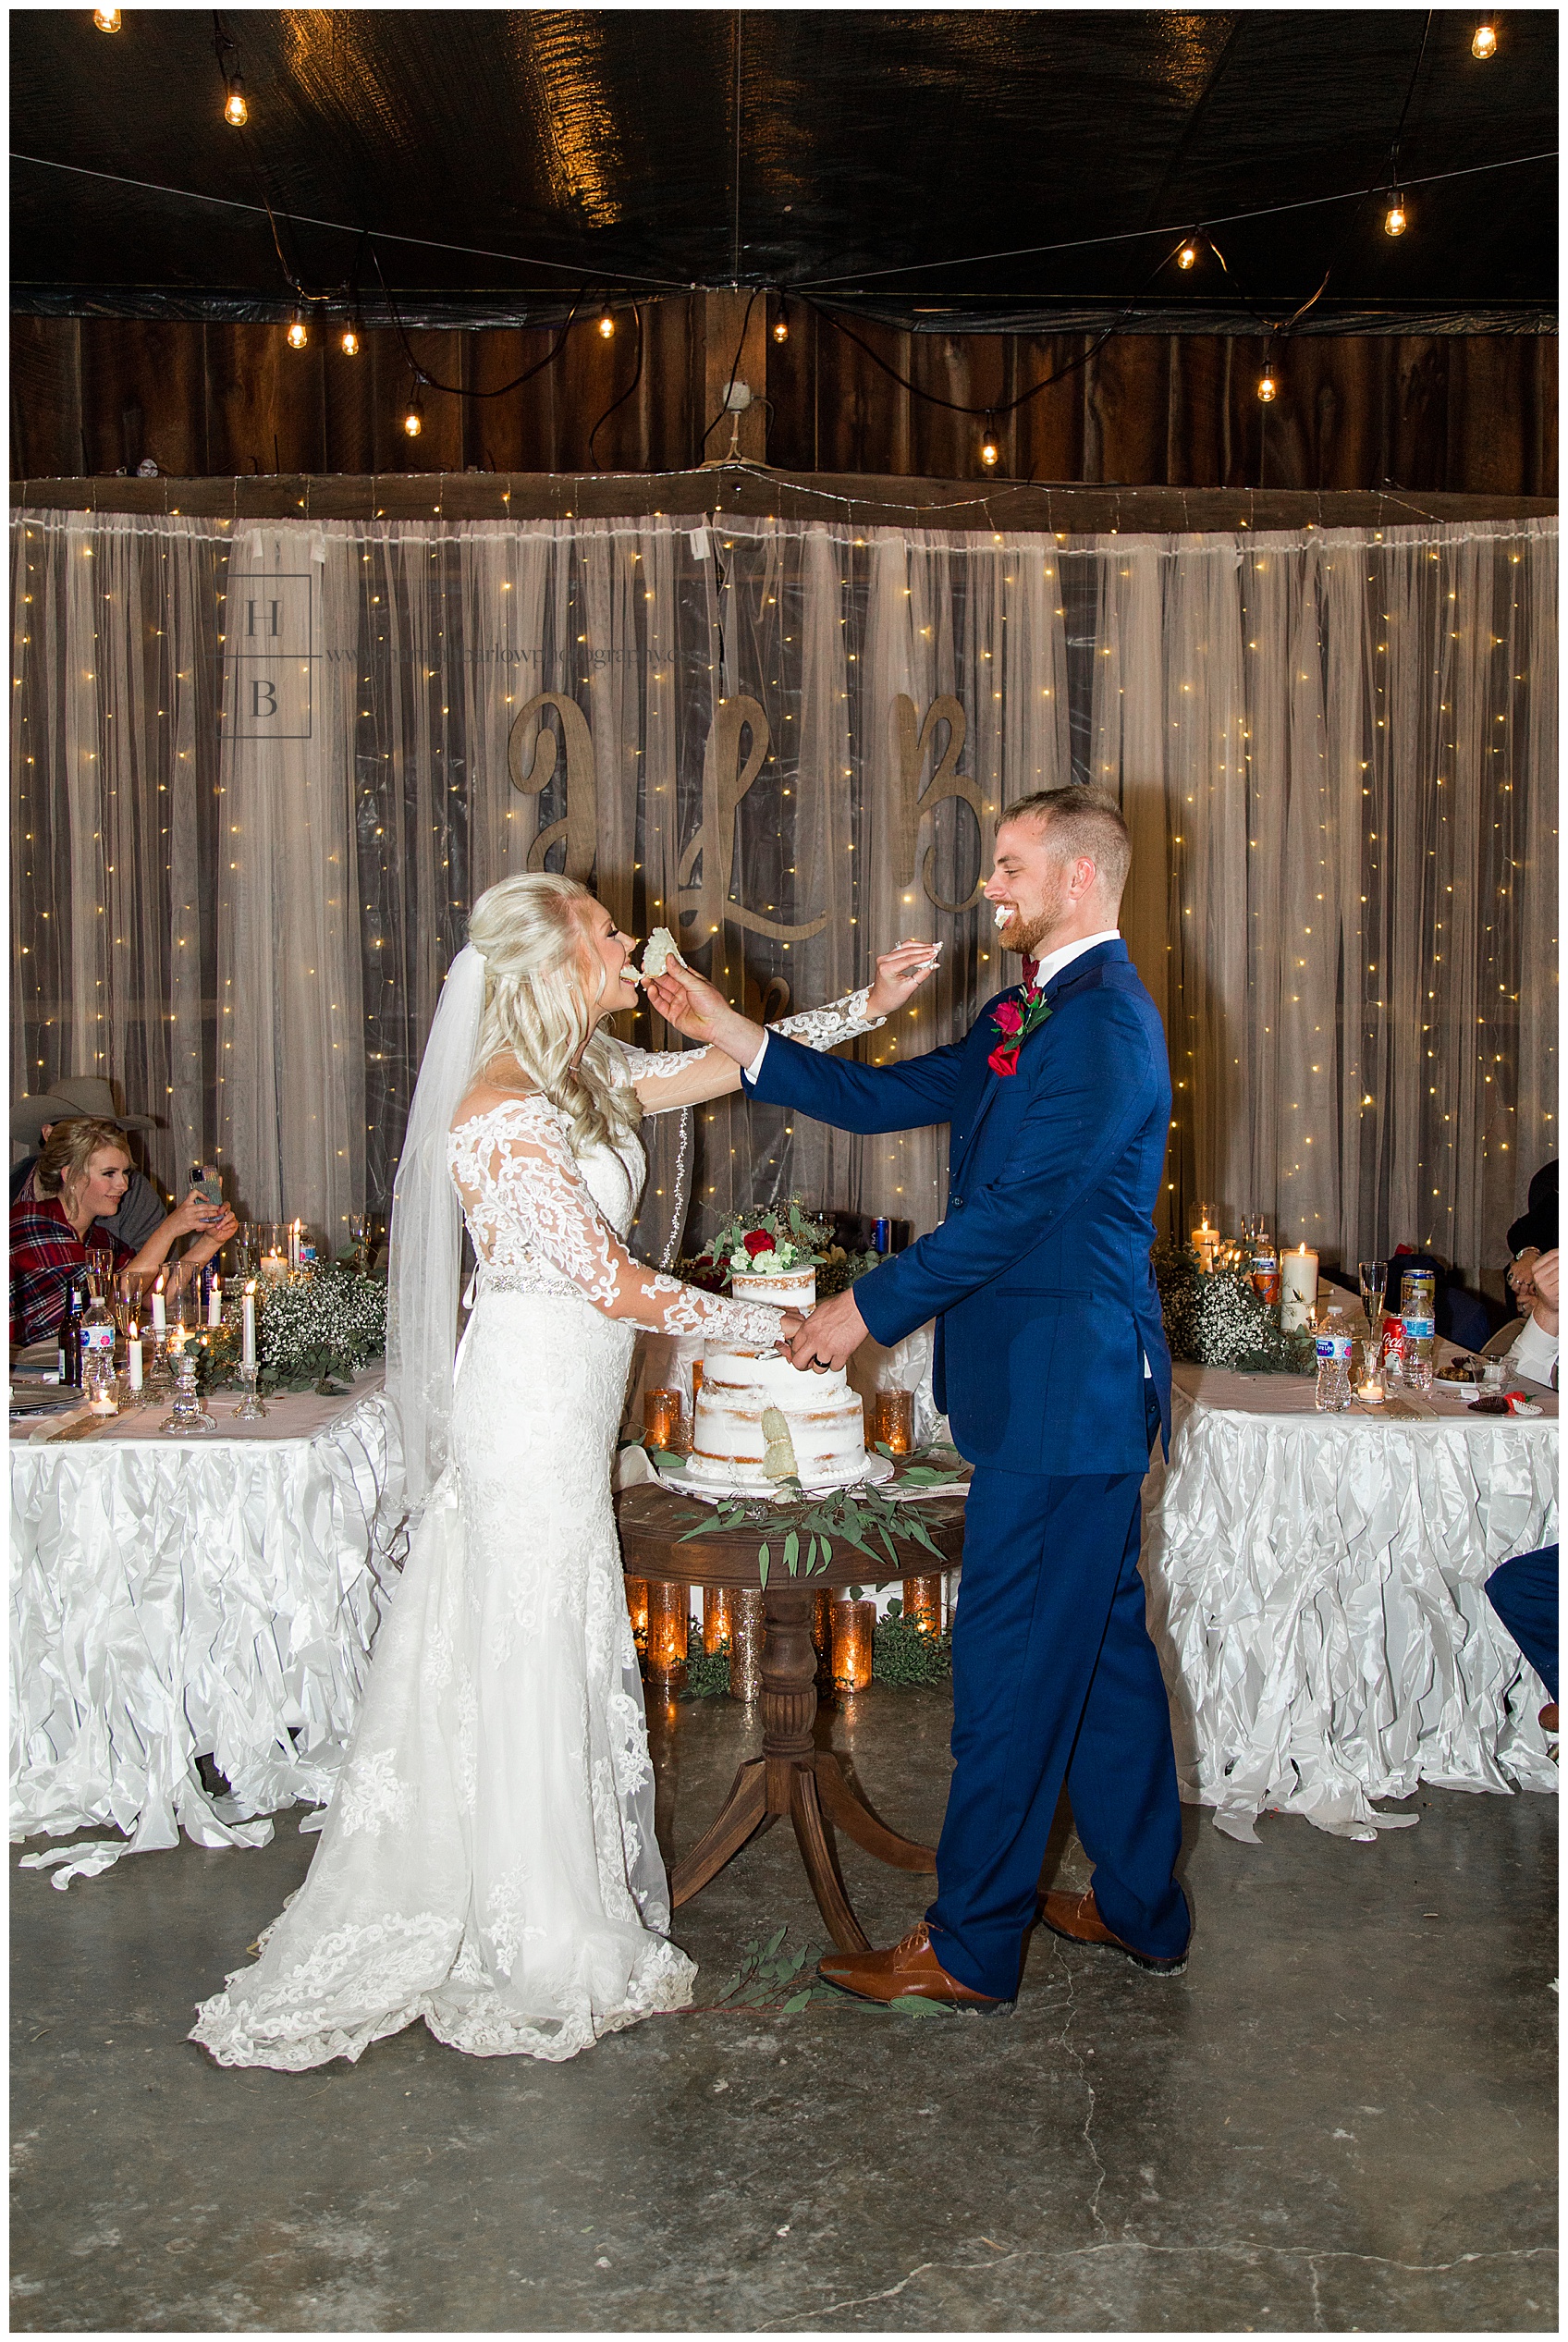 Bride and Groom Feeding Each Other Cake